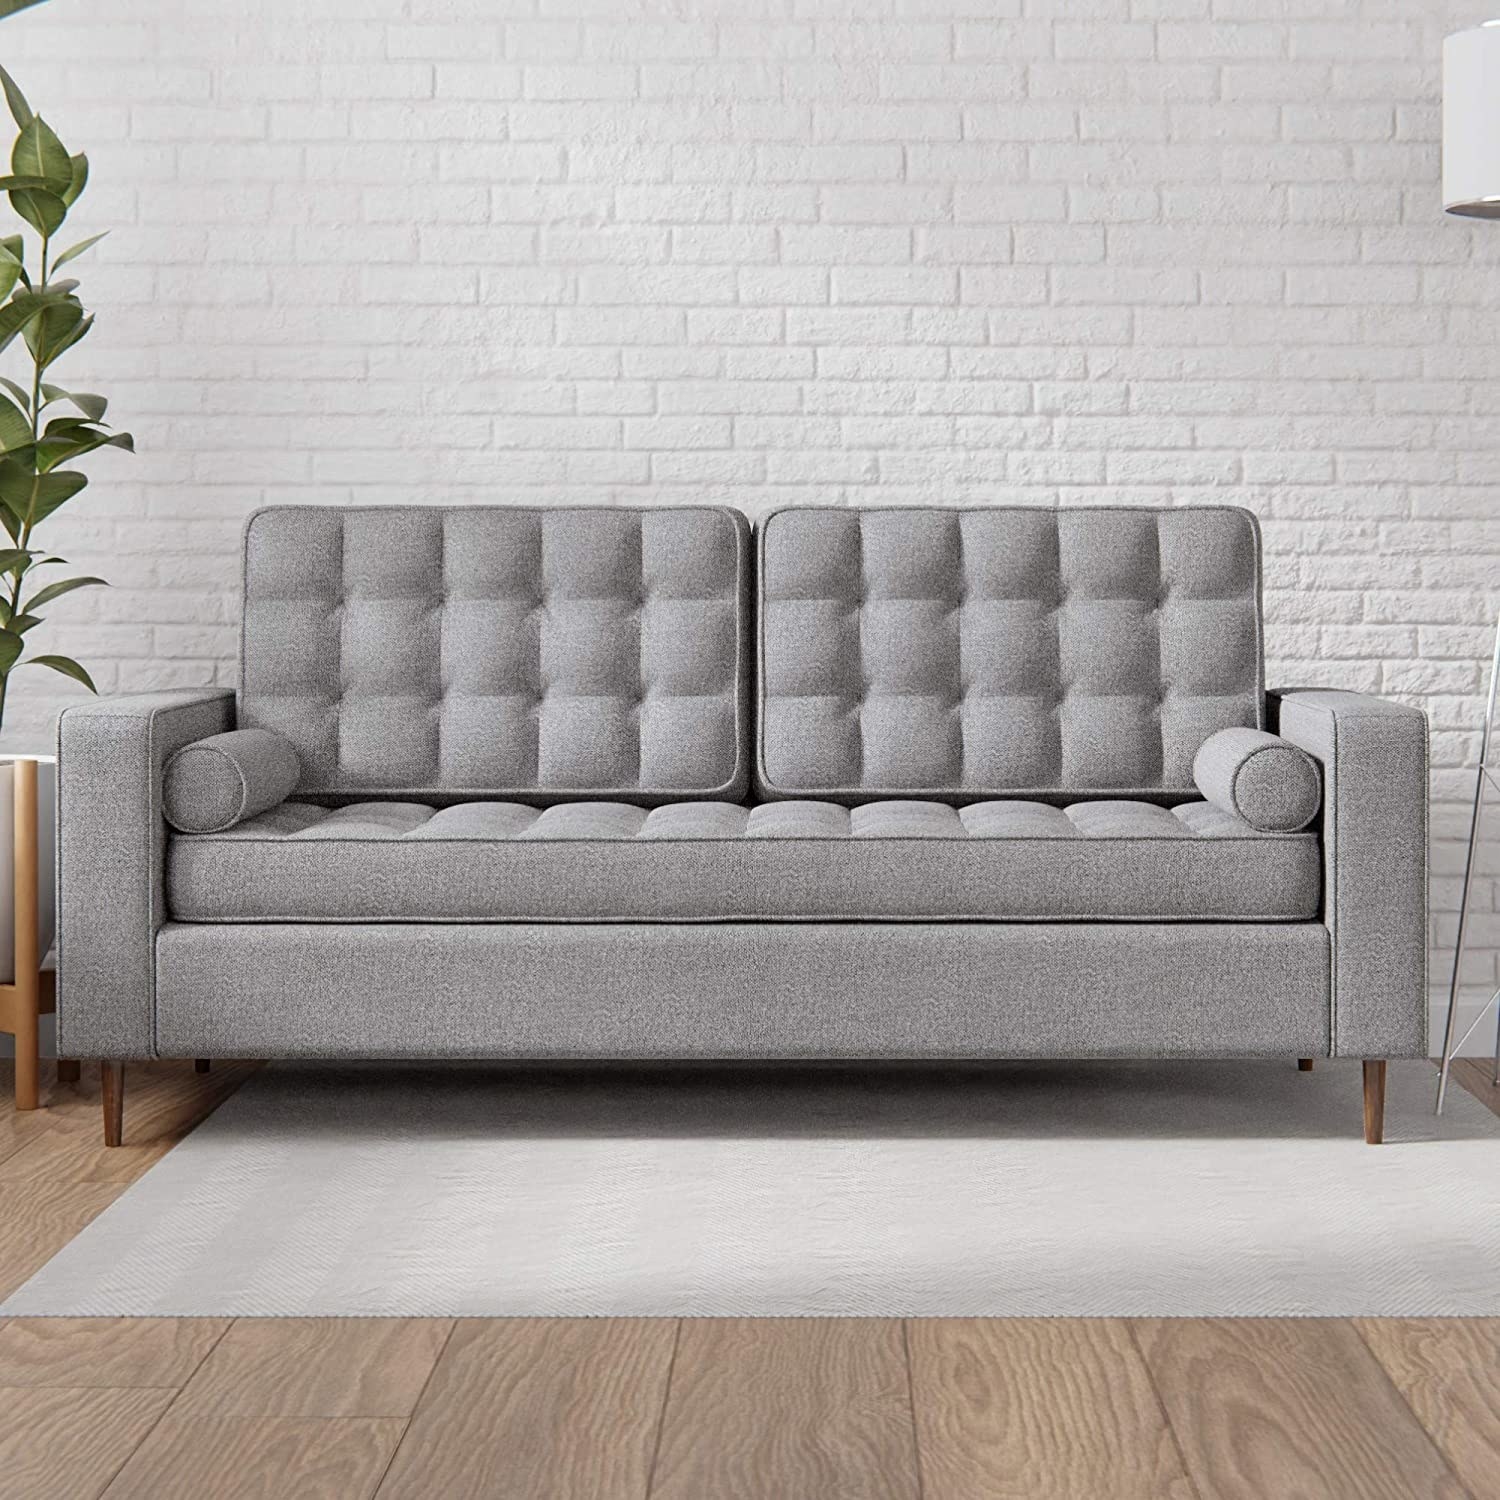 A loveseat that seats up to three people